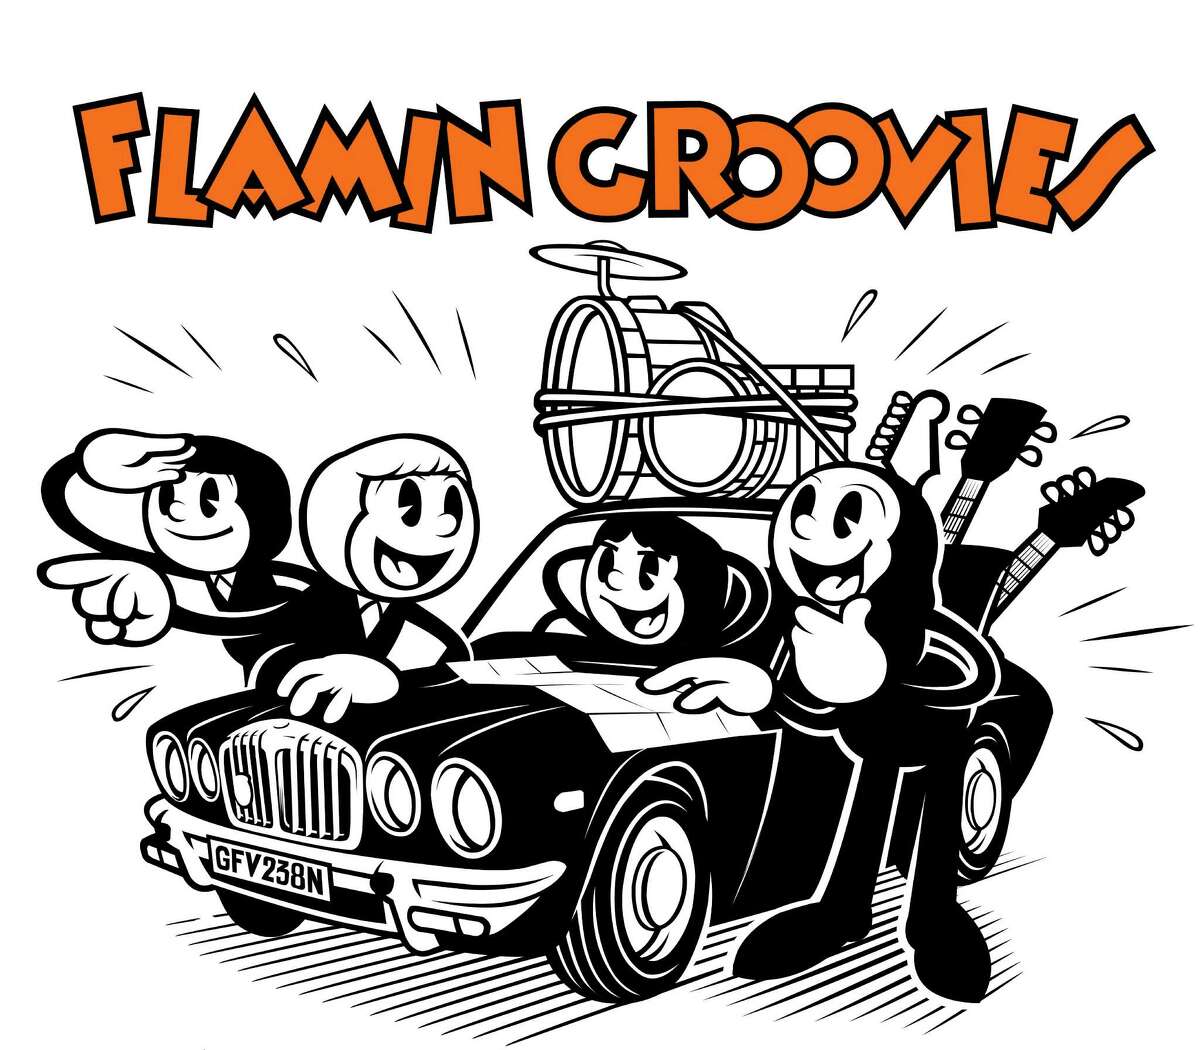 logo for rock band Flamin Groovies